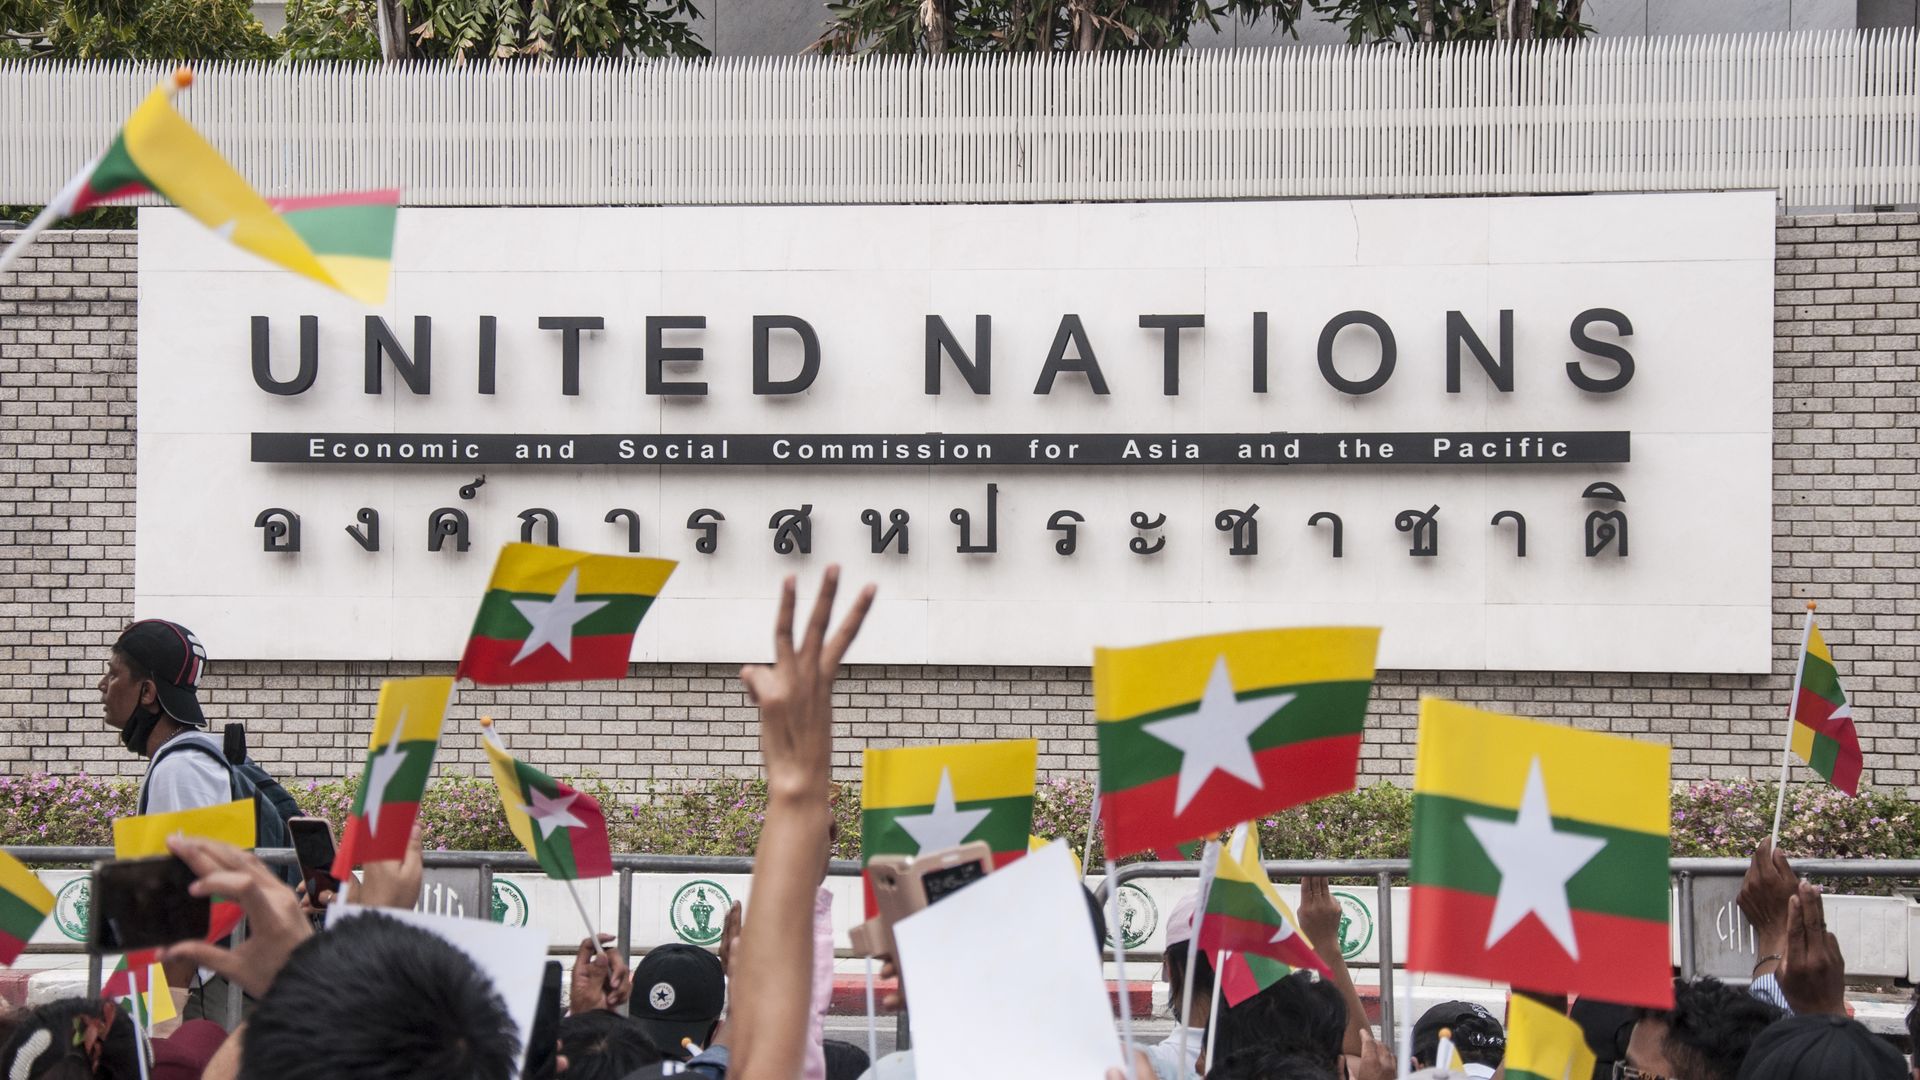 Protesters outside of a United Nations building in Bangkok, Thailand, in February 2021.